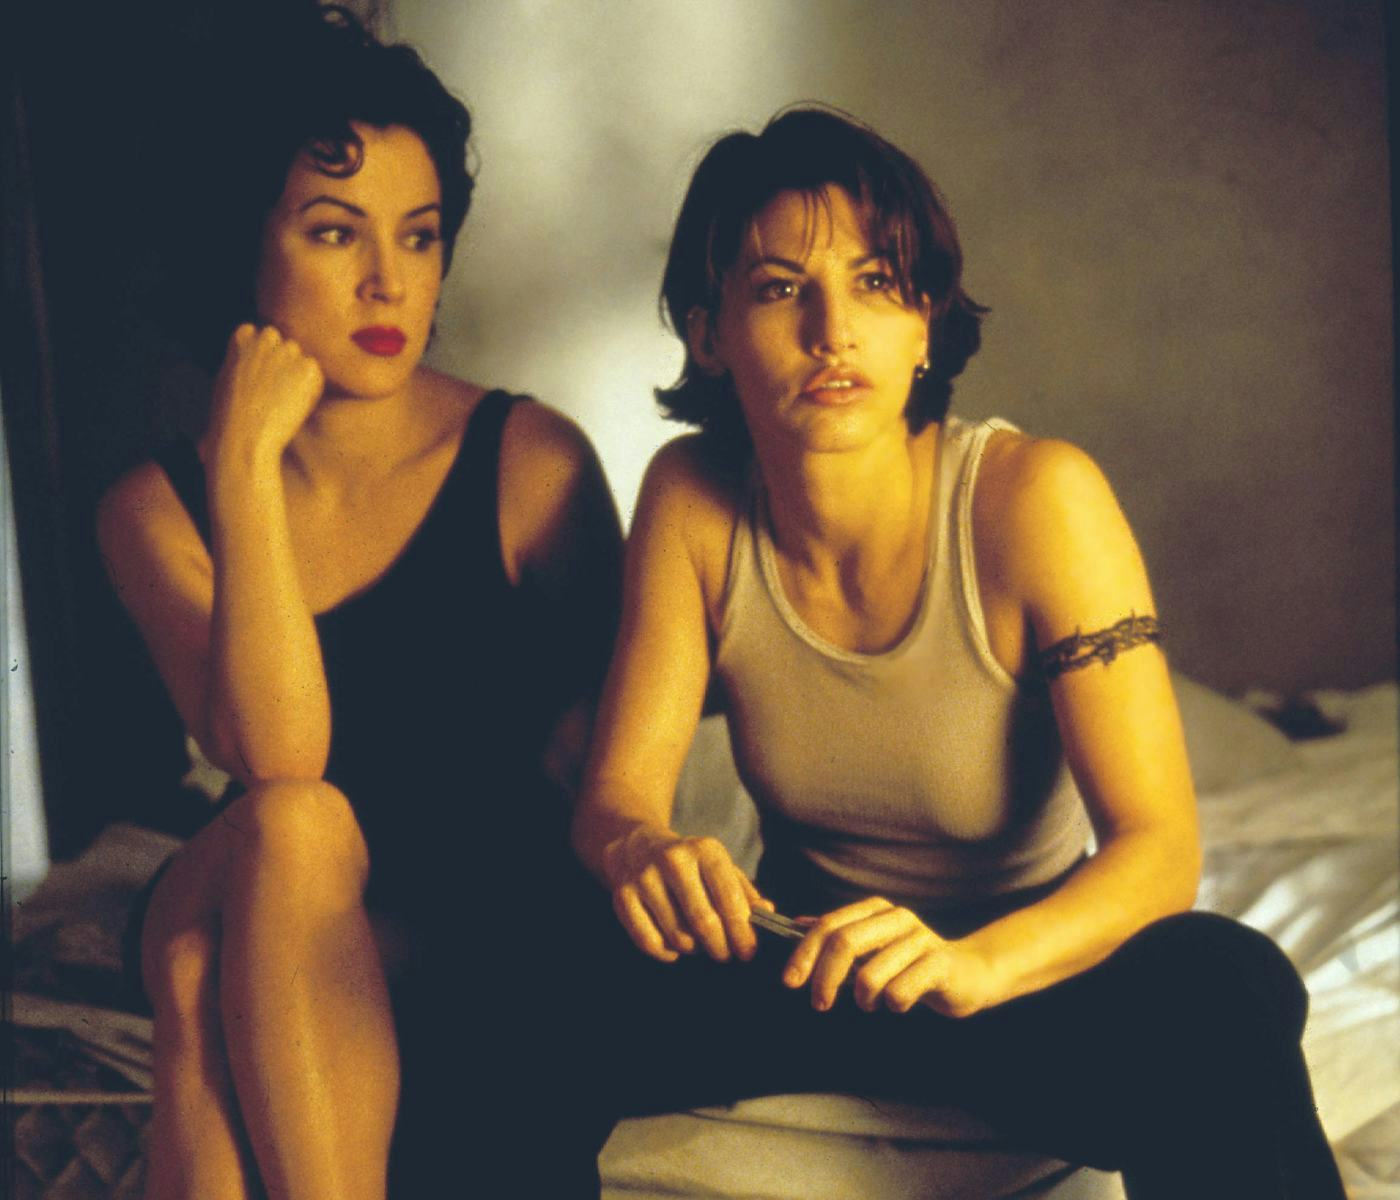 Two women sitting on a bed, one in a black dress and the other in a tank top, looking thoughtful.